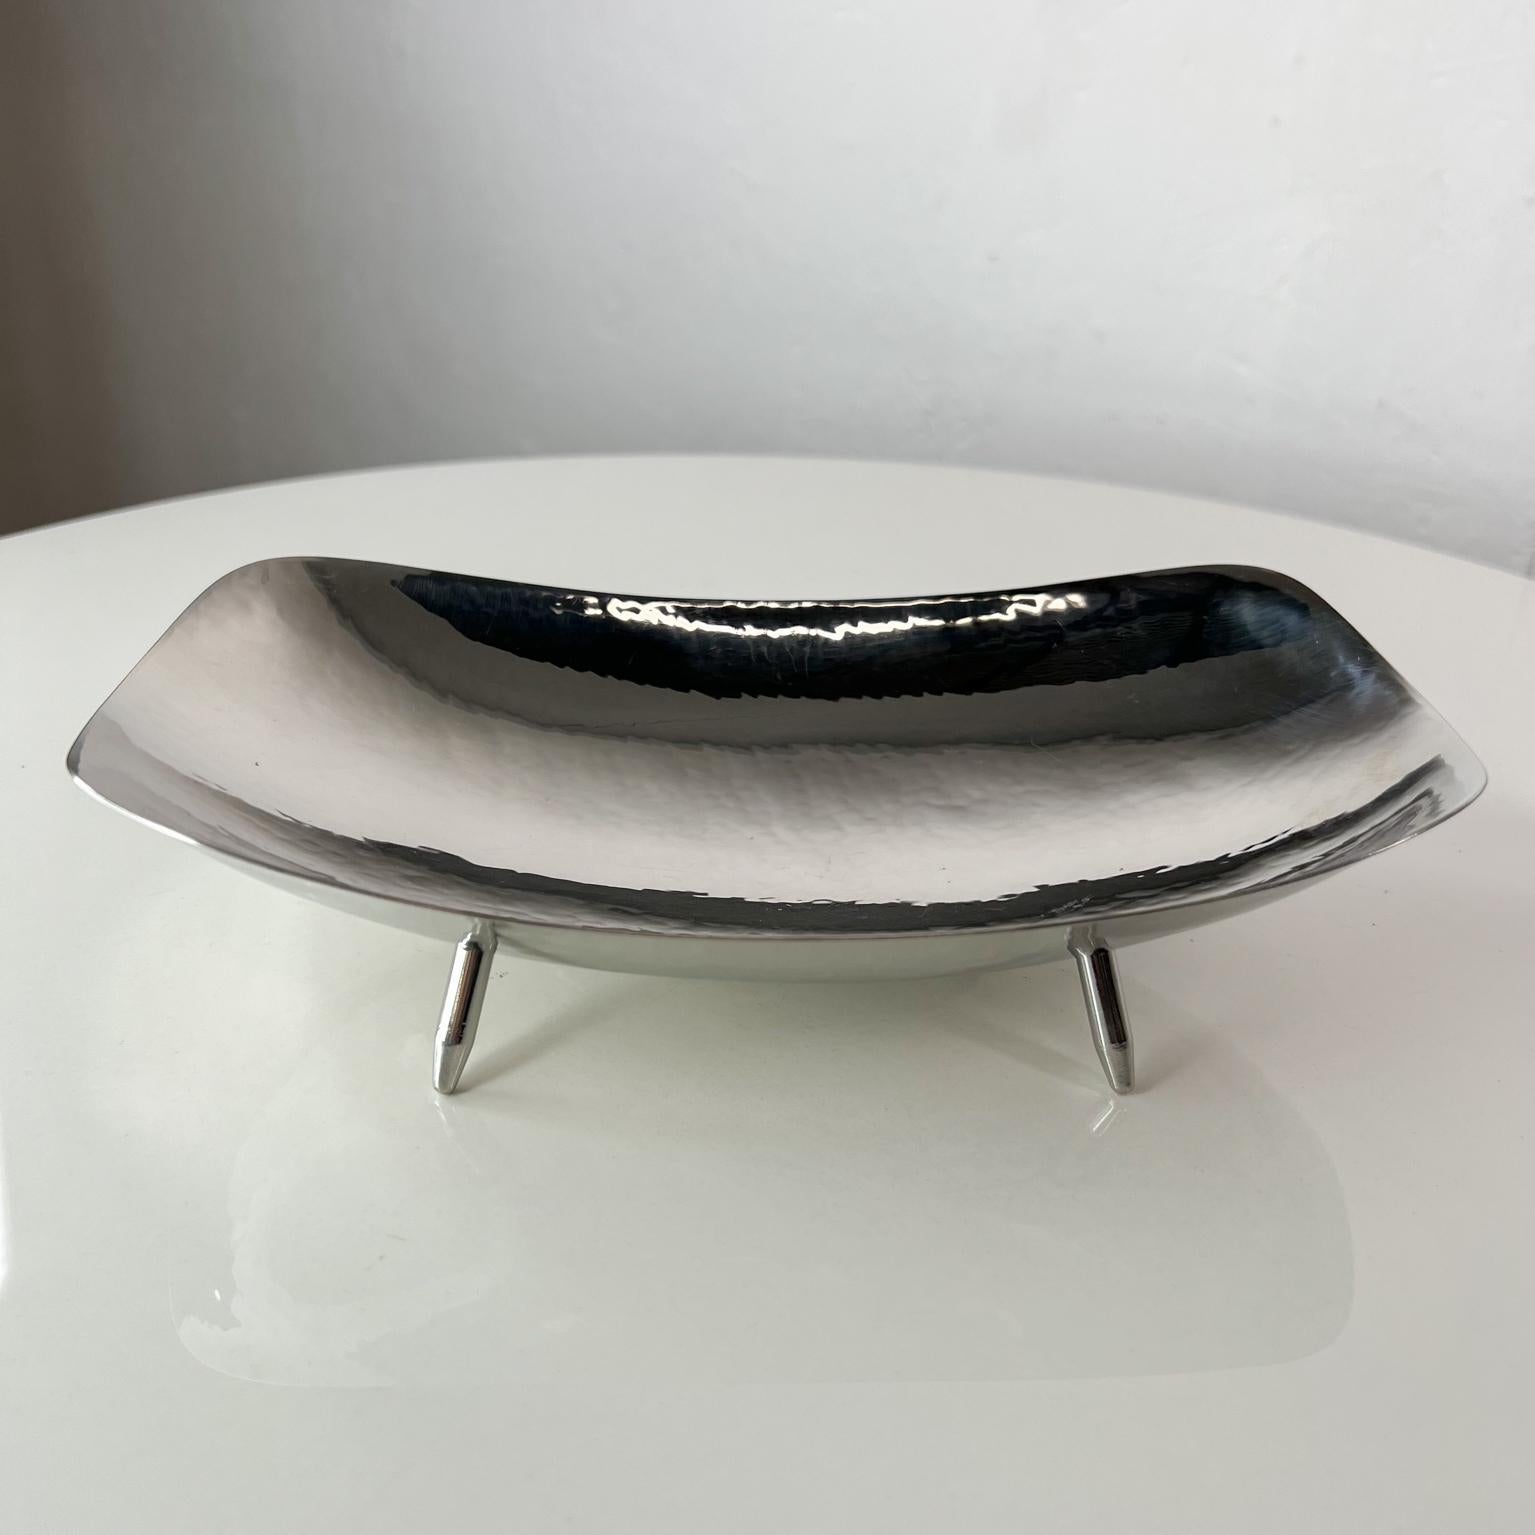 1940s vintage Modernist sculptural chrome dish footed 
Keswick School of Industrial Arts, United Kingdom
Measures: 5.38 width x 9 depth x 2 tall
Maker stamped Firth Keswick Brit Staybrite 
Original preowned unrestored condition
See images